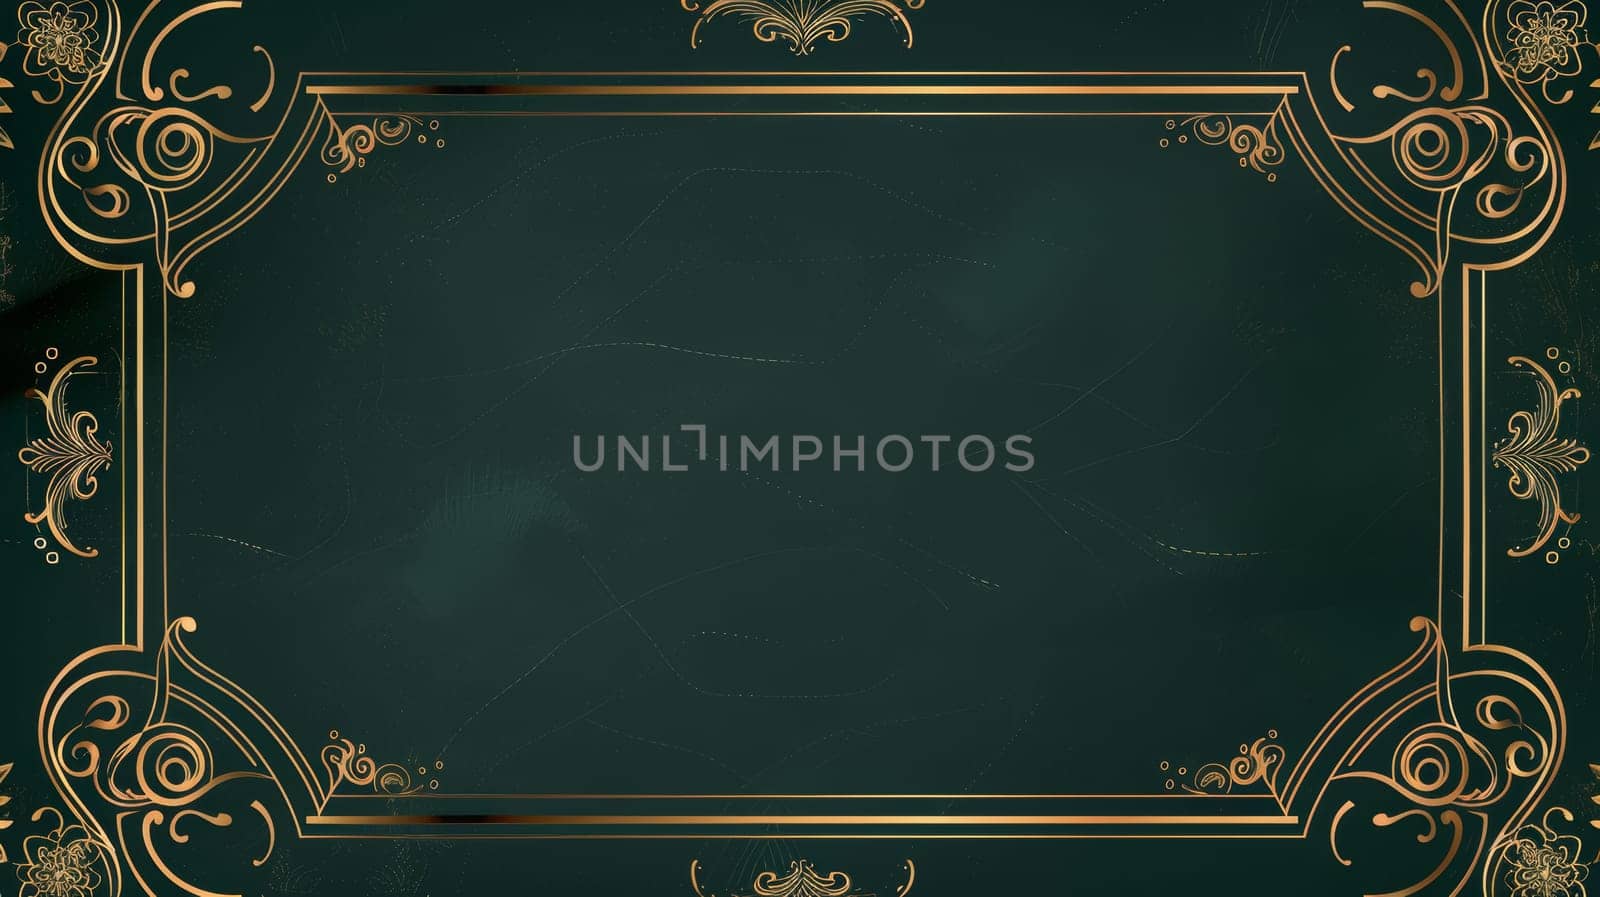 Elegant art nouveau classic antique design, gold lines gradient, frames on dark green background. Luxury illustration for gala, grand opening, or an art deco event. by Andrei_01